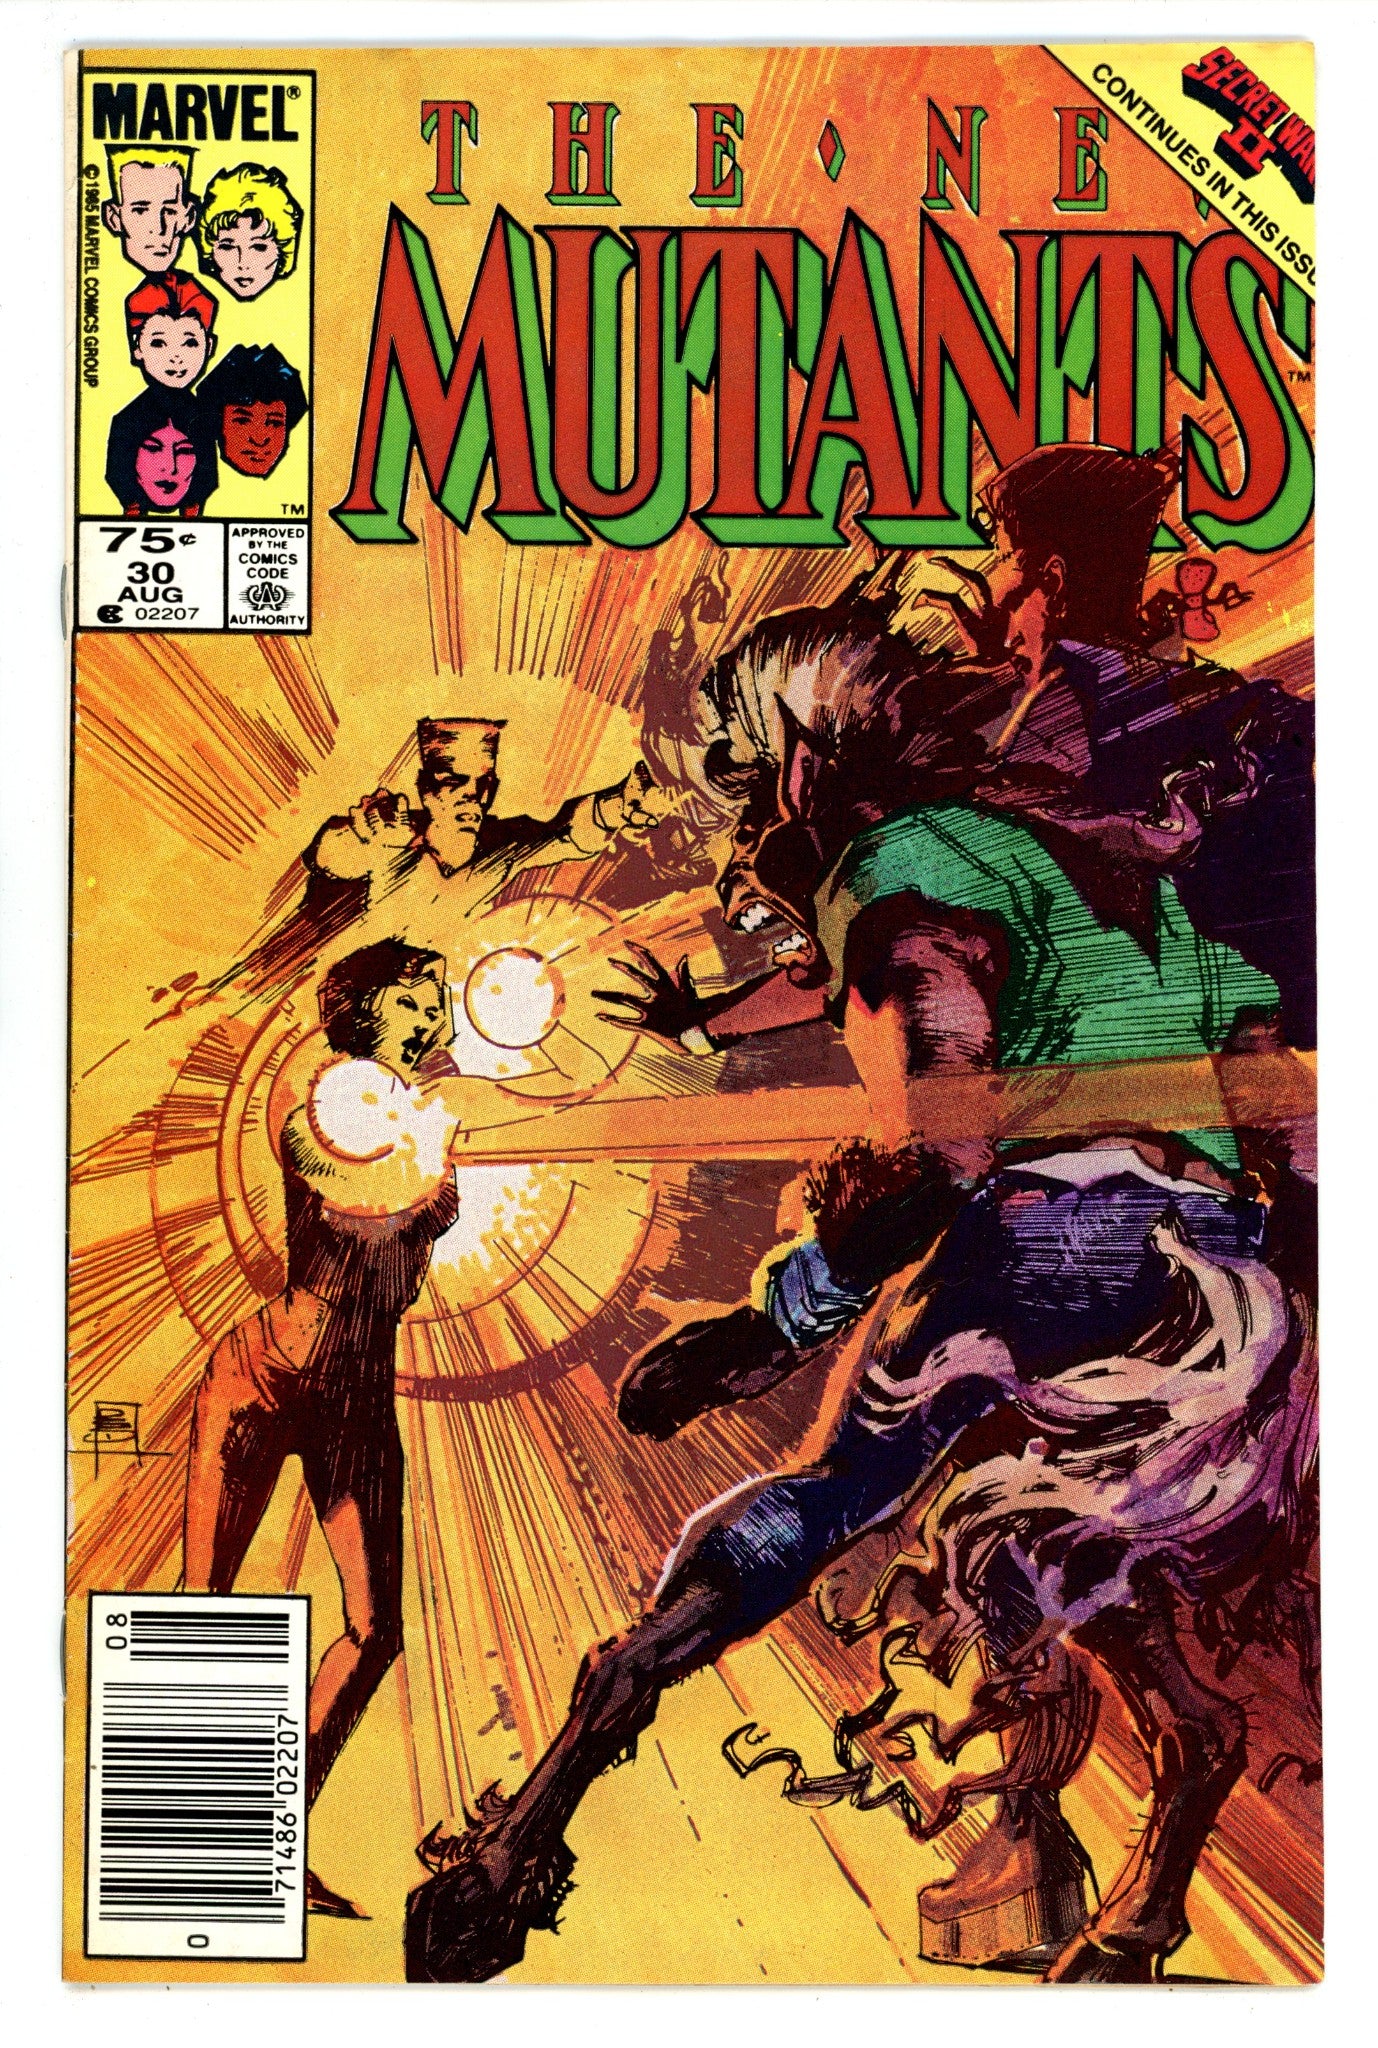 The New Mutants Vol 1 30 VF- (7.5) (1985) Canadian Price Variant 